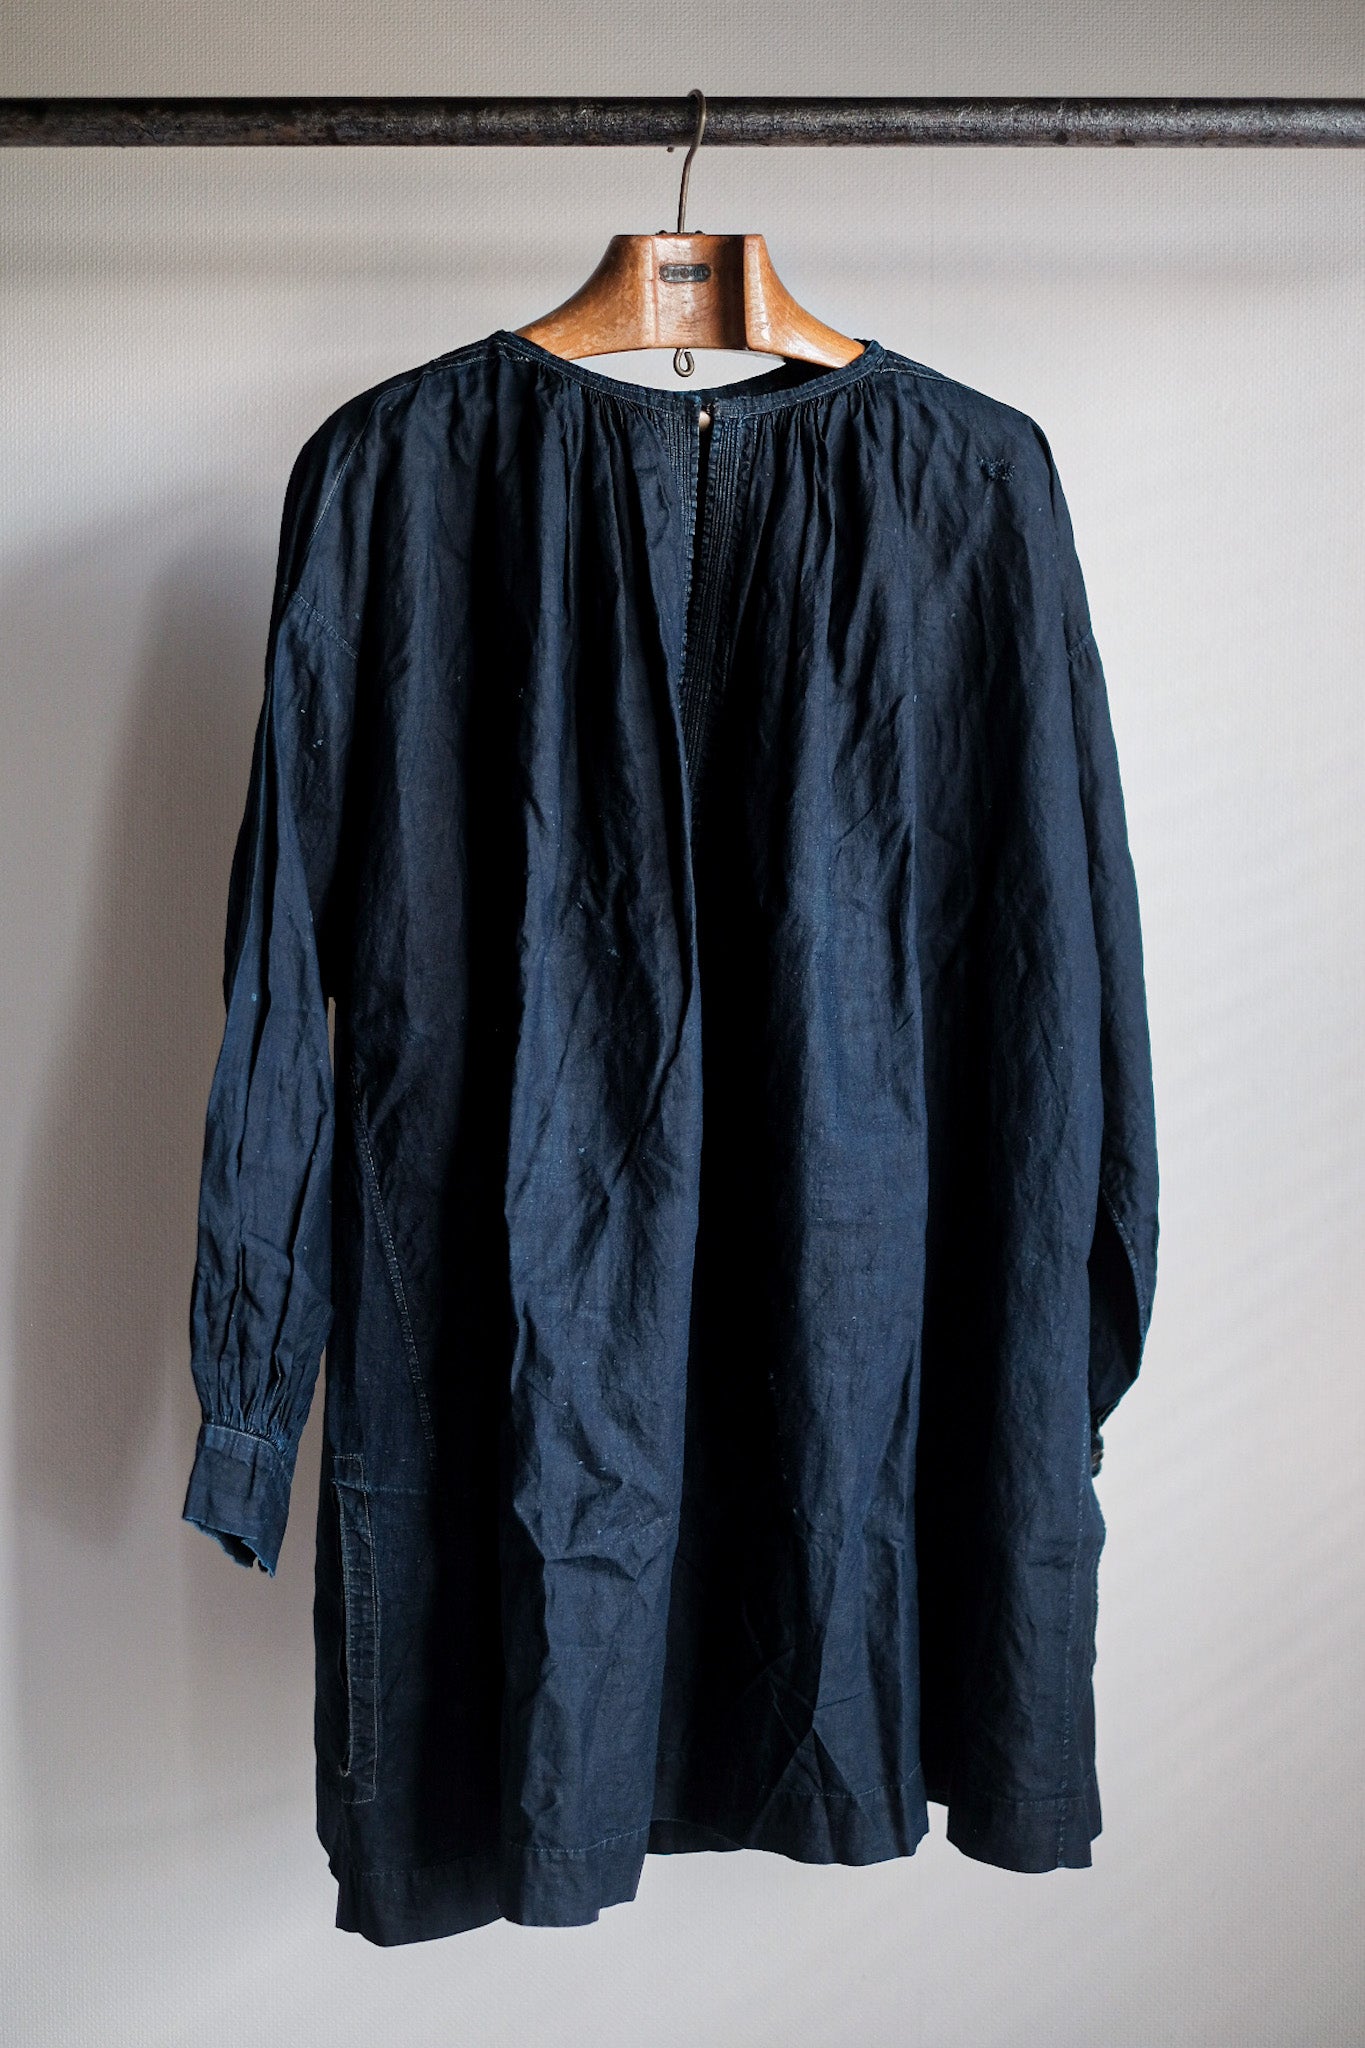 [Early 20th C] French Antique Indigo Linen Smock 